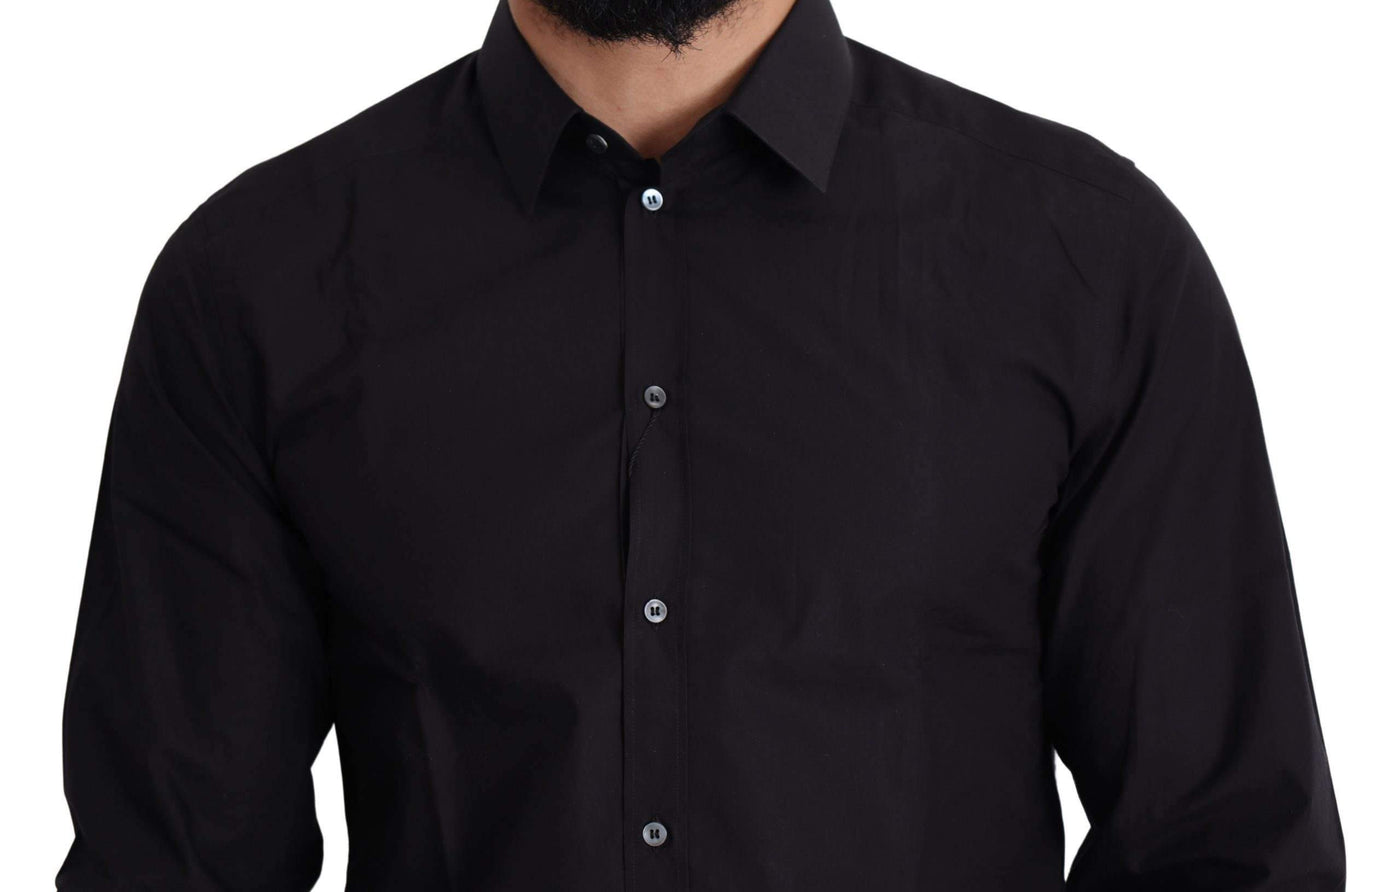 Dolce & Gabbana Black Cotton Men Formal GOLD Dress Shirt #men, Black, Brand_Dolce & Gabbana, Dolce & Gabbana, feed-agegroup-adult, feed-color-black, feed-gender-male, feed-size-IT37 | XS, feed-size-IT41 | L, Gender_Men, IT37 | XS, IT41 | L, Men - New Arrivals, Shirts - Men - Clothing at SEYMAYKA